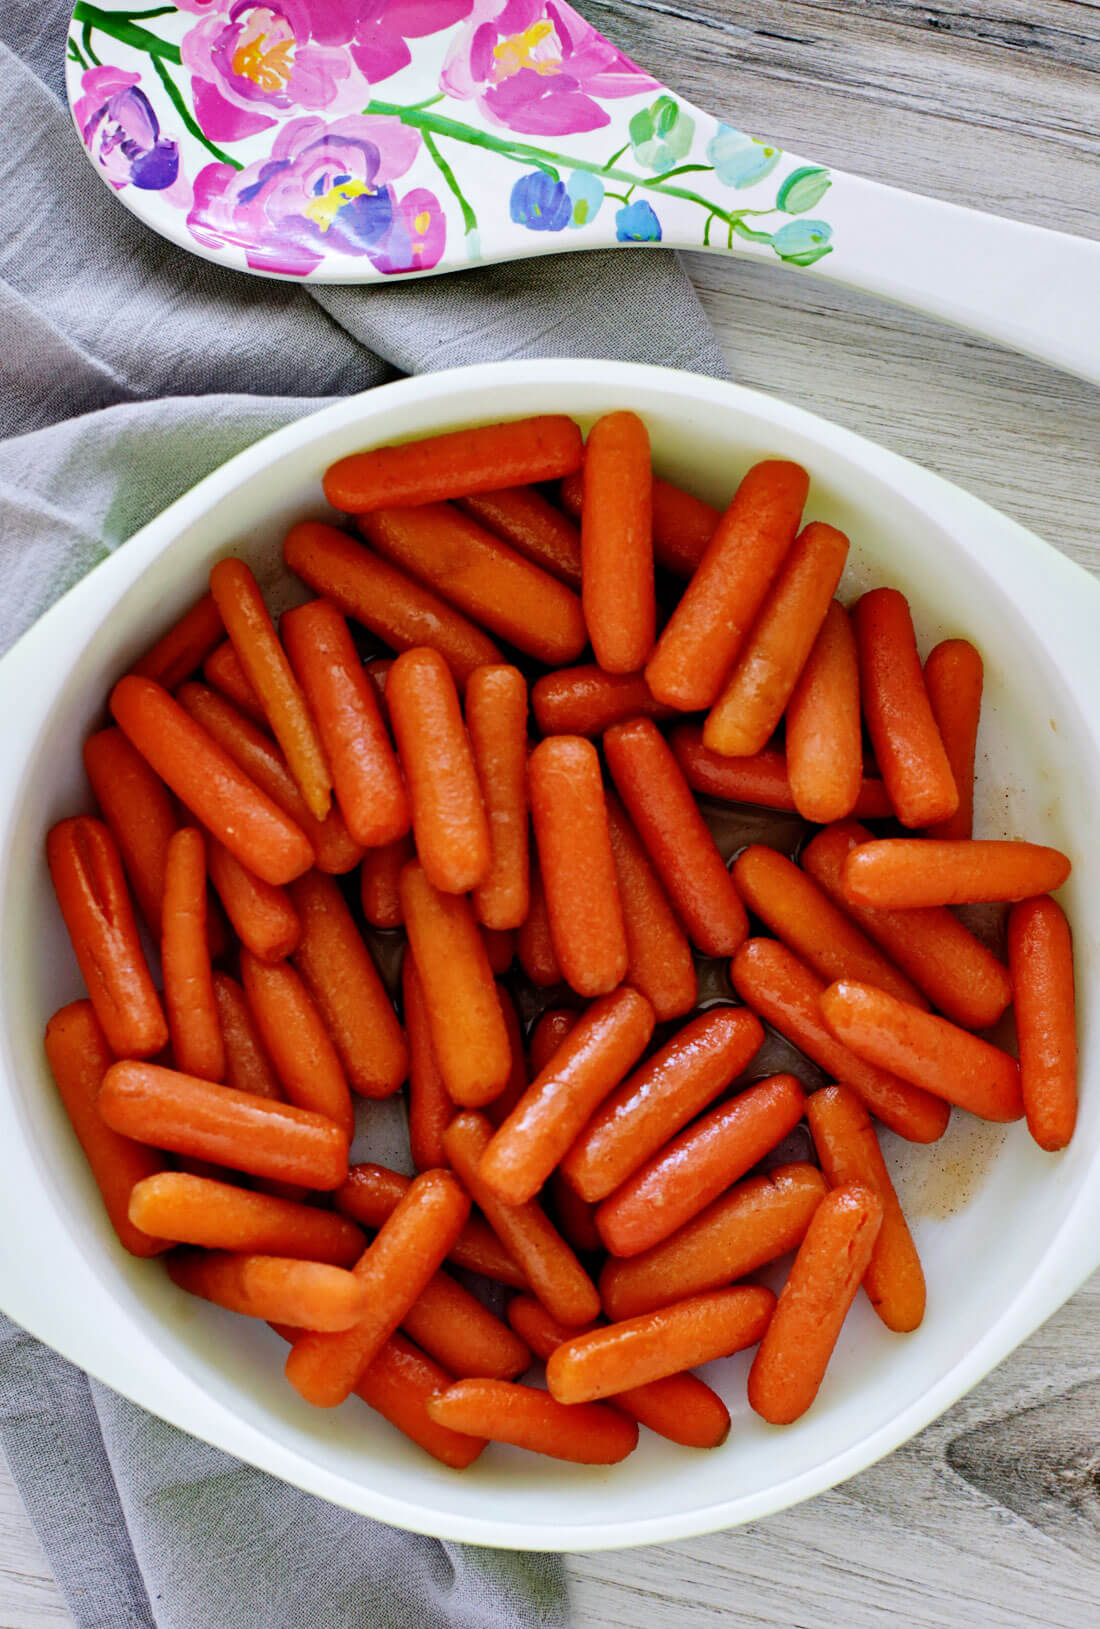 Ready to serve brown sugar glazed carrots - the perfect side dish! 